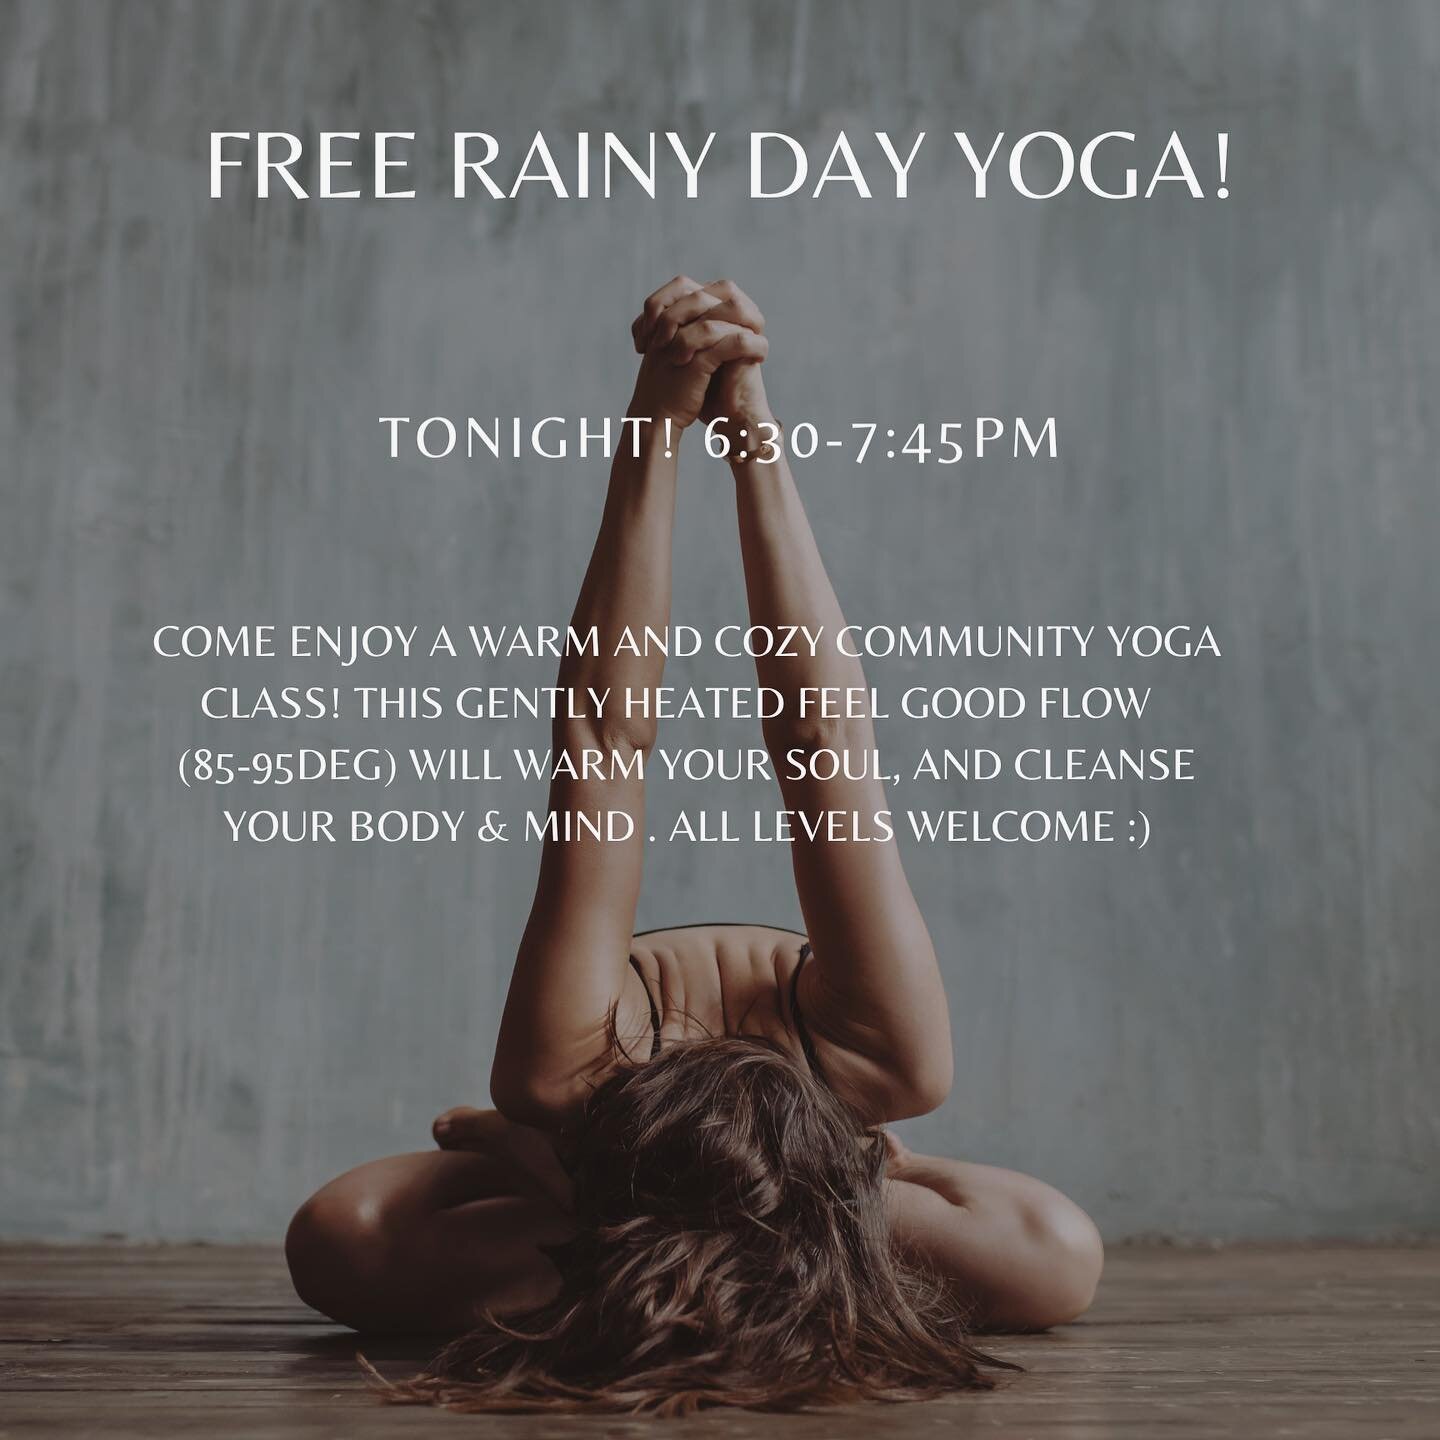 Come enjoy some self-love and community-love 💞 this evening with a free Feel Good Flow pop-up class 6:30pm with Alex! This will be a gently heated class (85-90 deg) to help warm our tissues, deeply stretch tight muscles and stiff joints, and cleanse